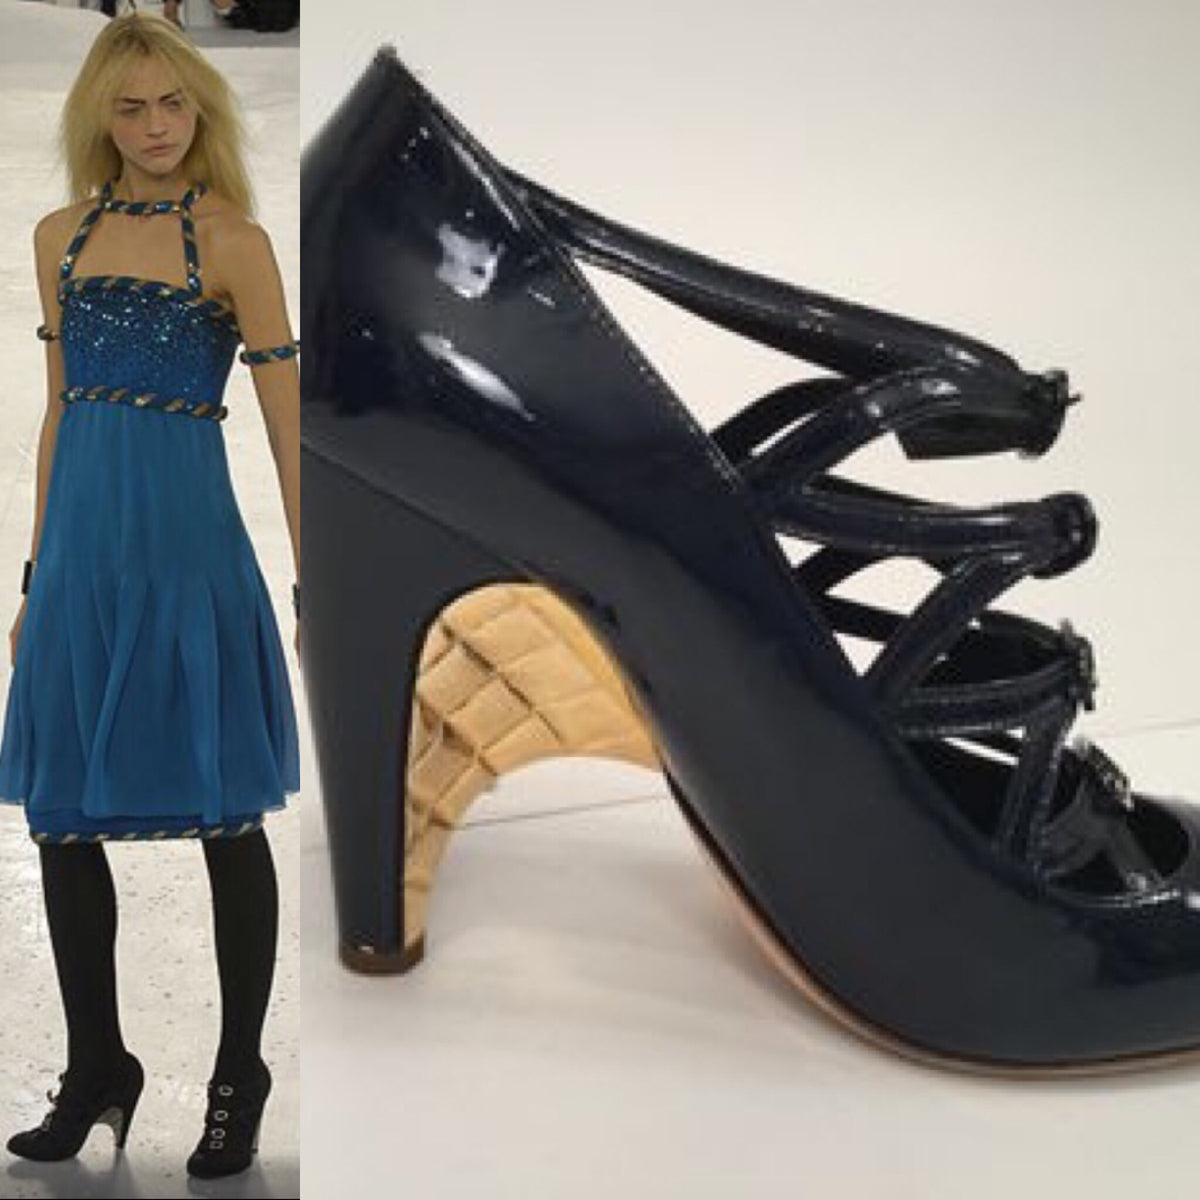 CHANEL Navy Blue Patent Leather and Gold Pumps size 38 1/2 – JDEX